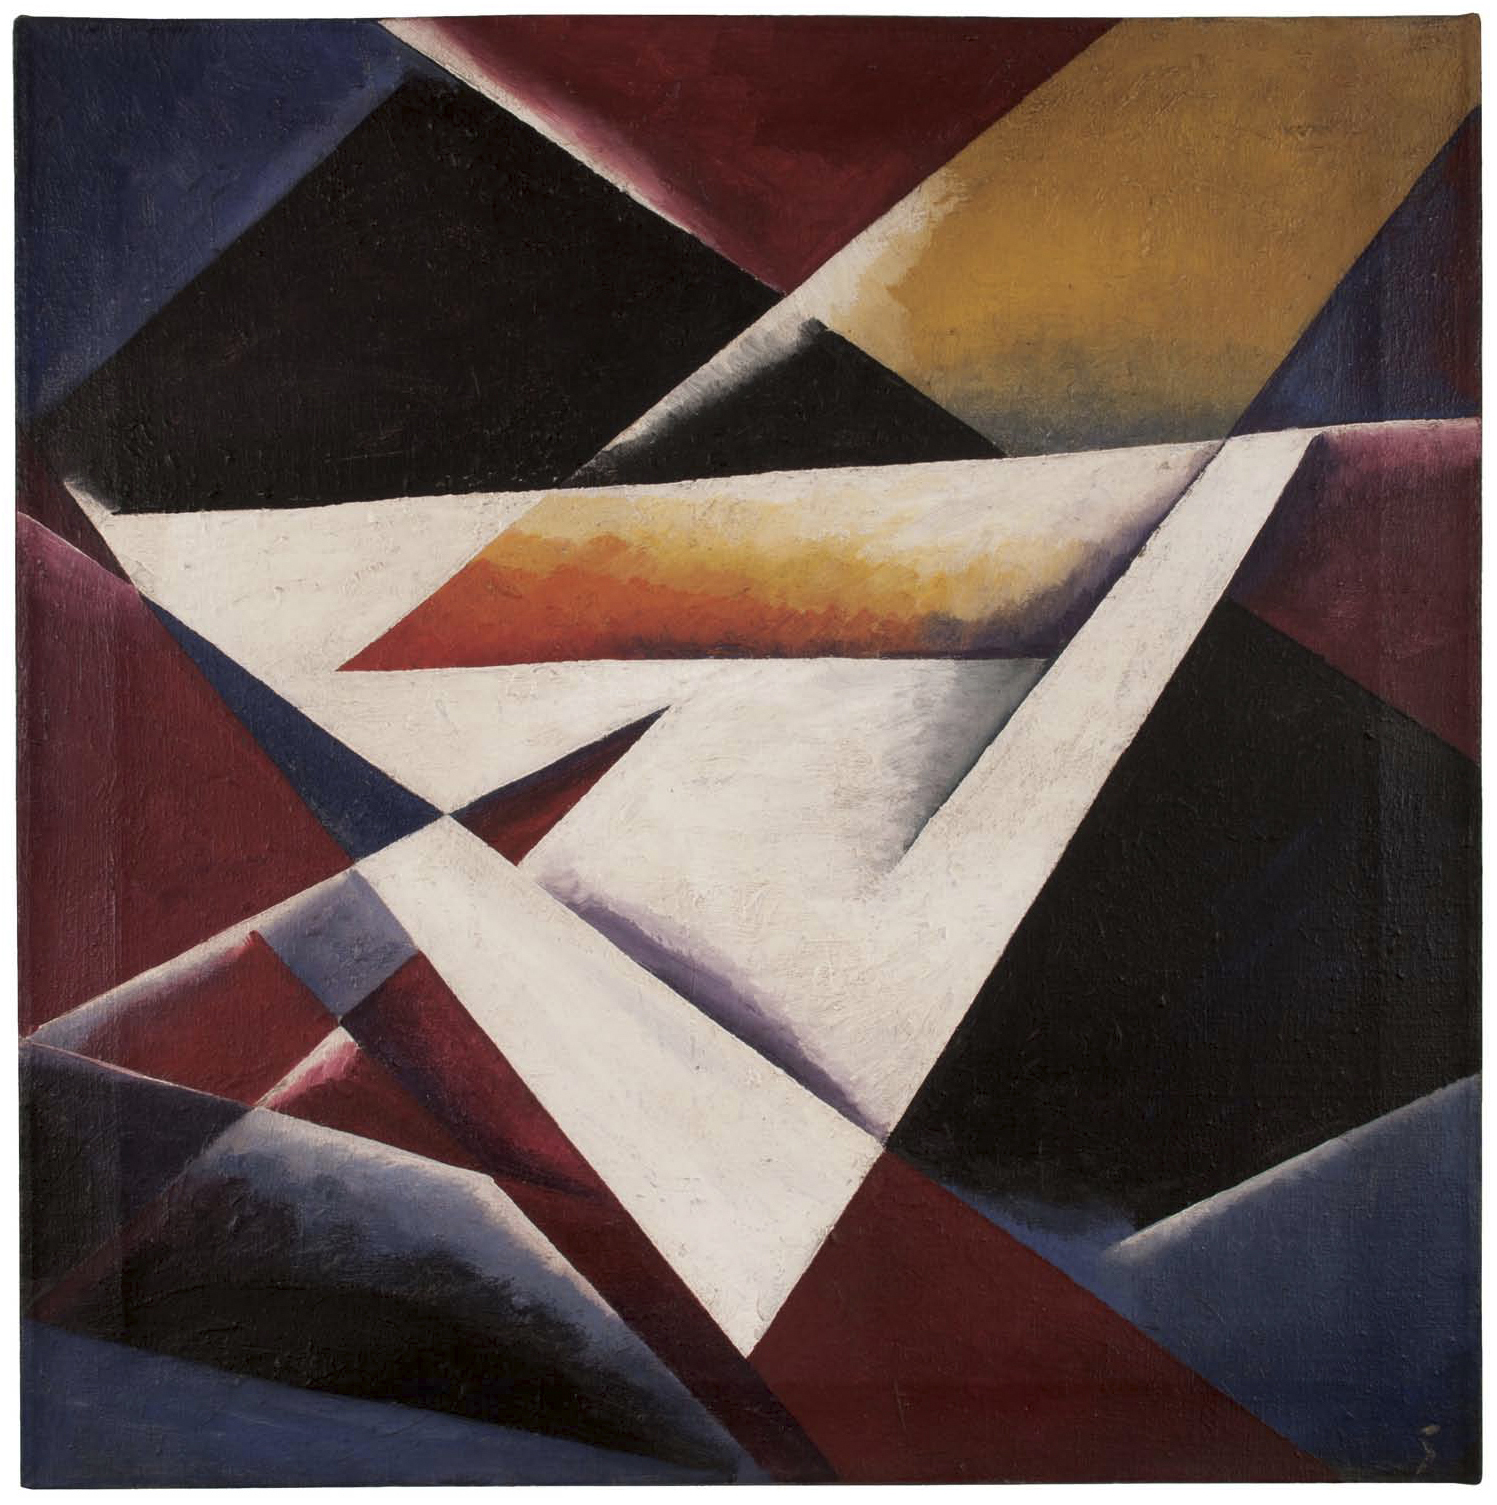  Unattributed. Unsigned. In the style of Lyubov Popova.&nbsp;Oil on canvas, 60 x 60 cm. 